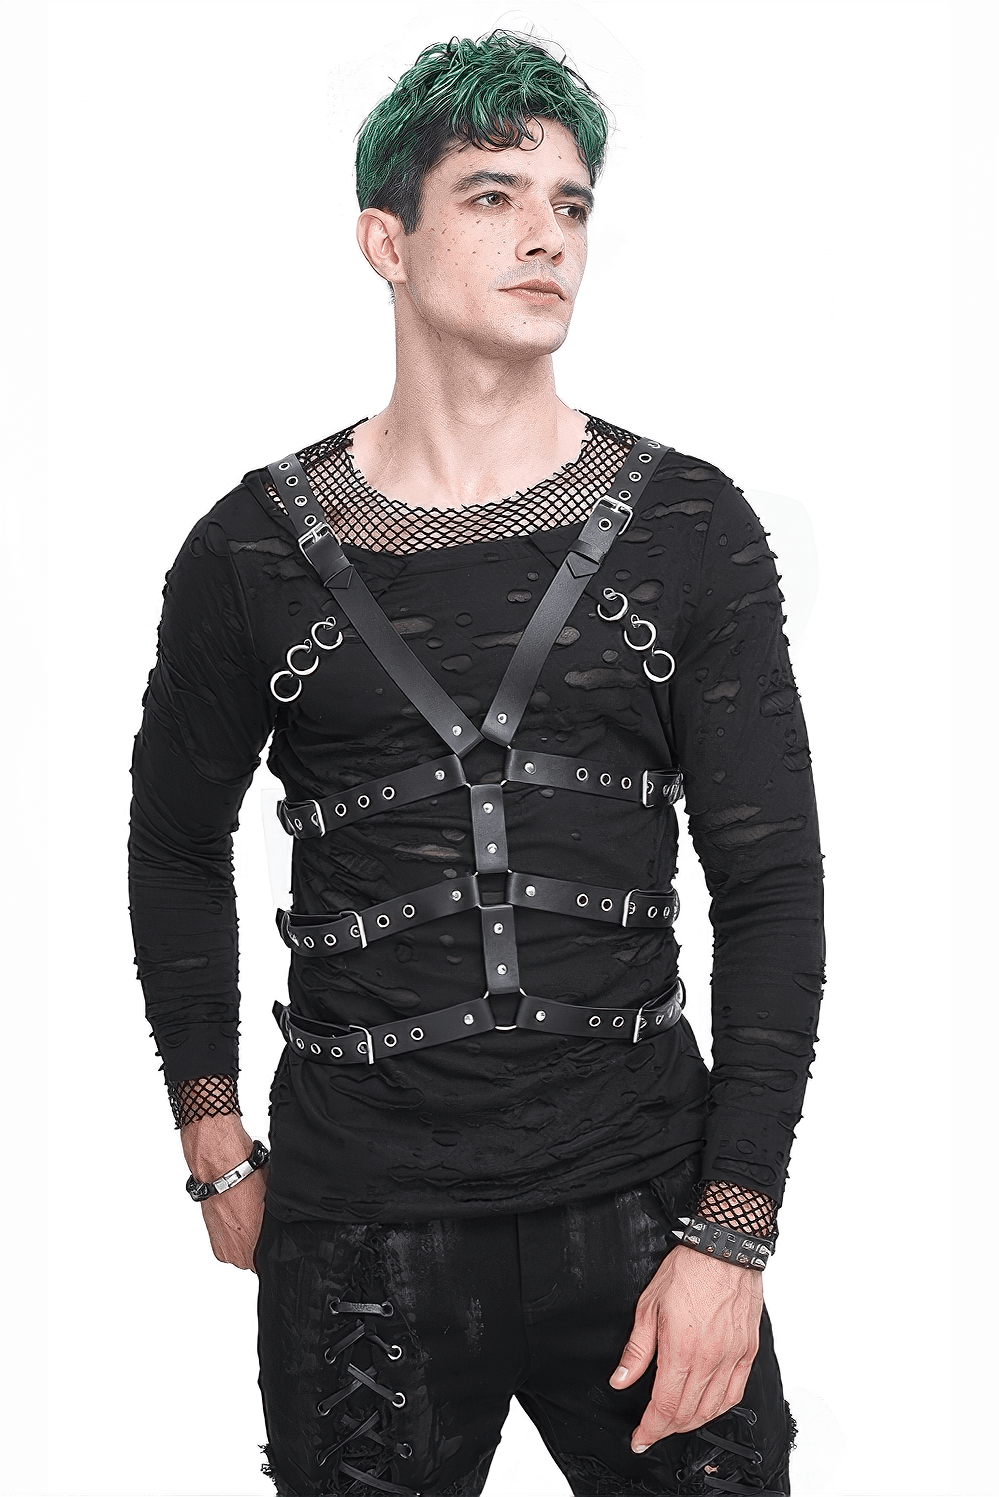 Male Multi-Buckle PU Leather Body Harness in Punk Style